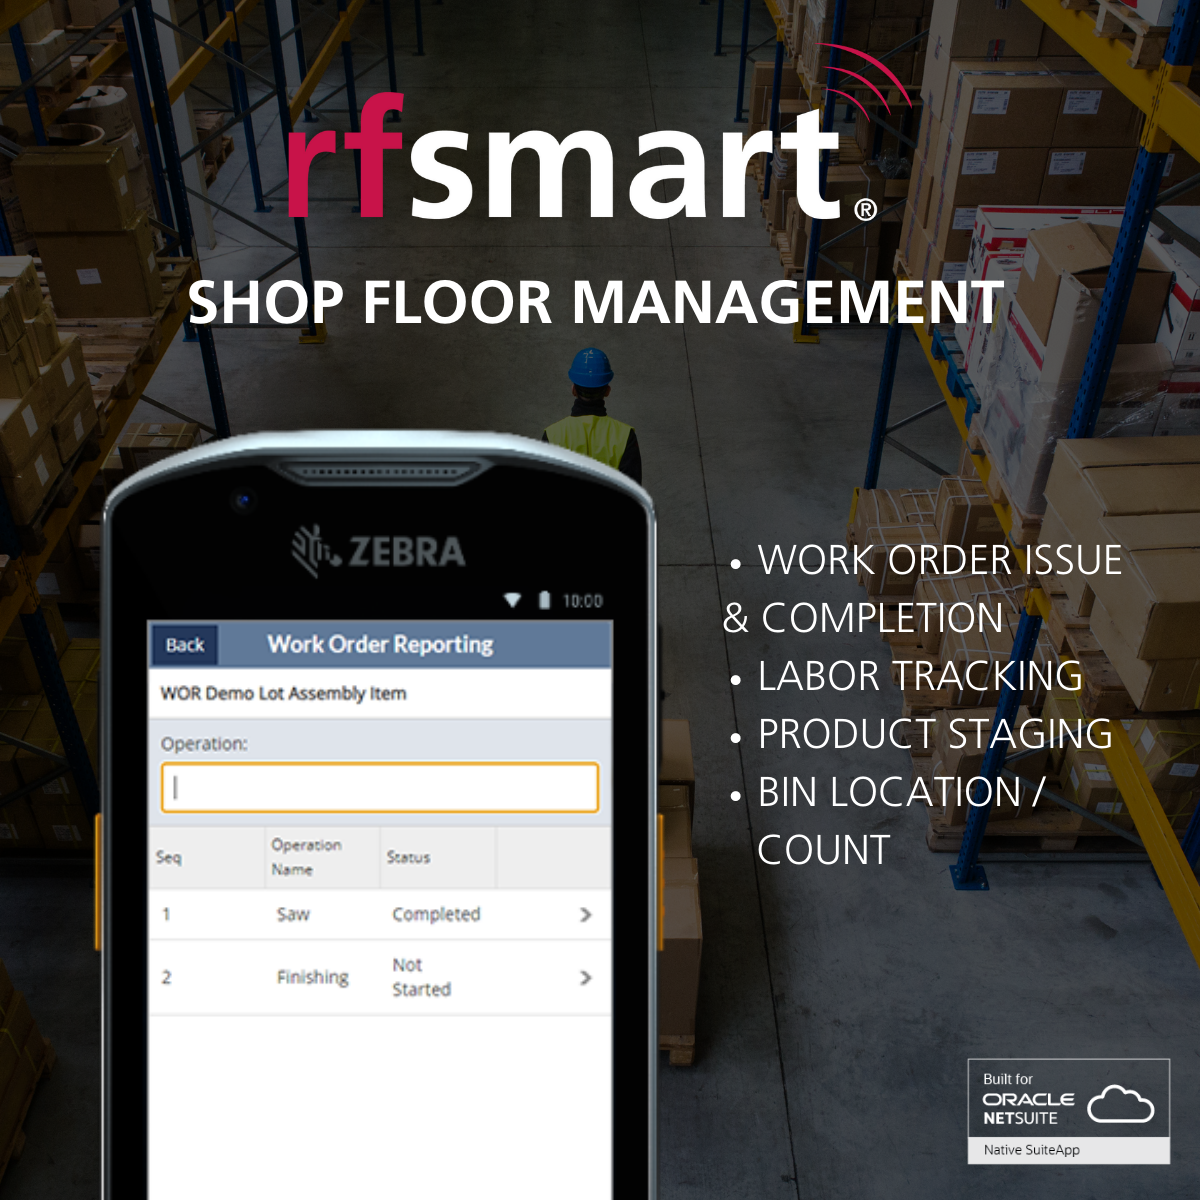 Warehouse management from the shop floor with a barcode scanner